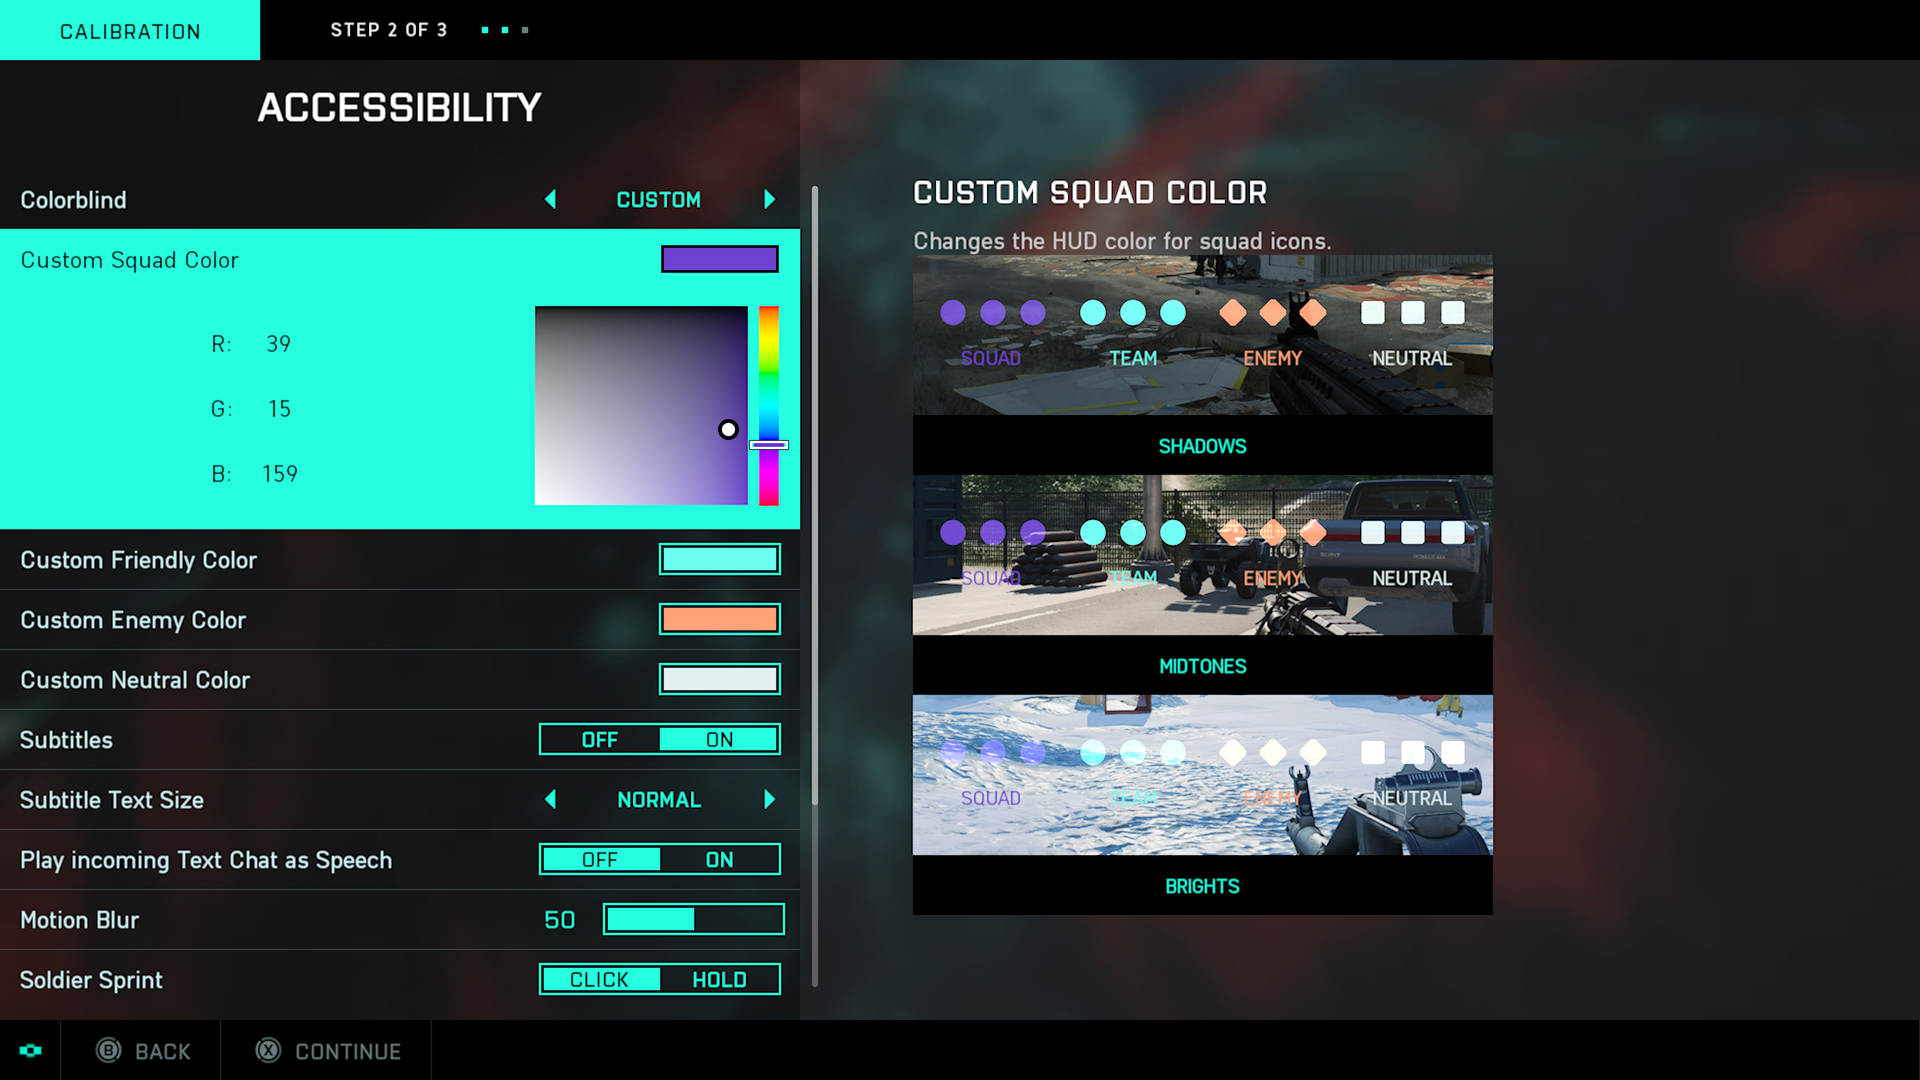 screenshot of battlefield 2042's Accessibility menu navigating the custom color blind option with color pickers. RGB values, color, and hue pickers are shown.